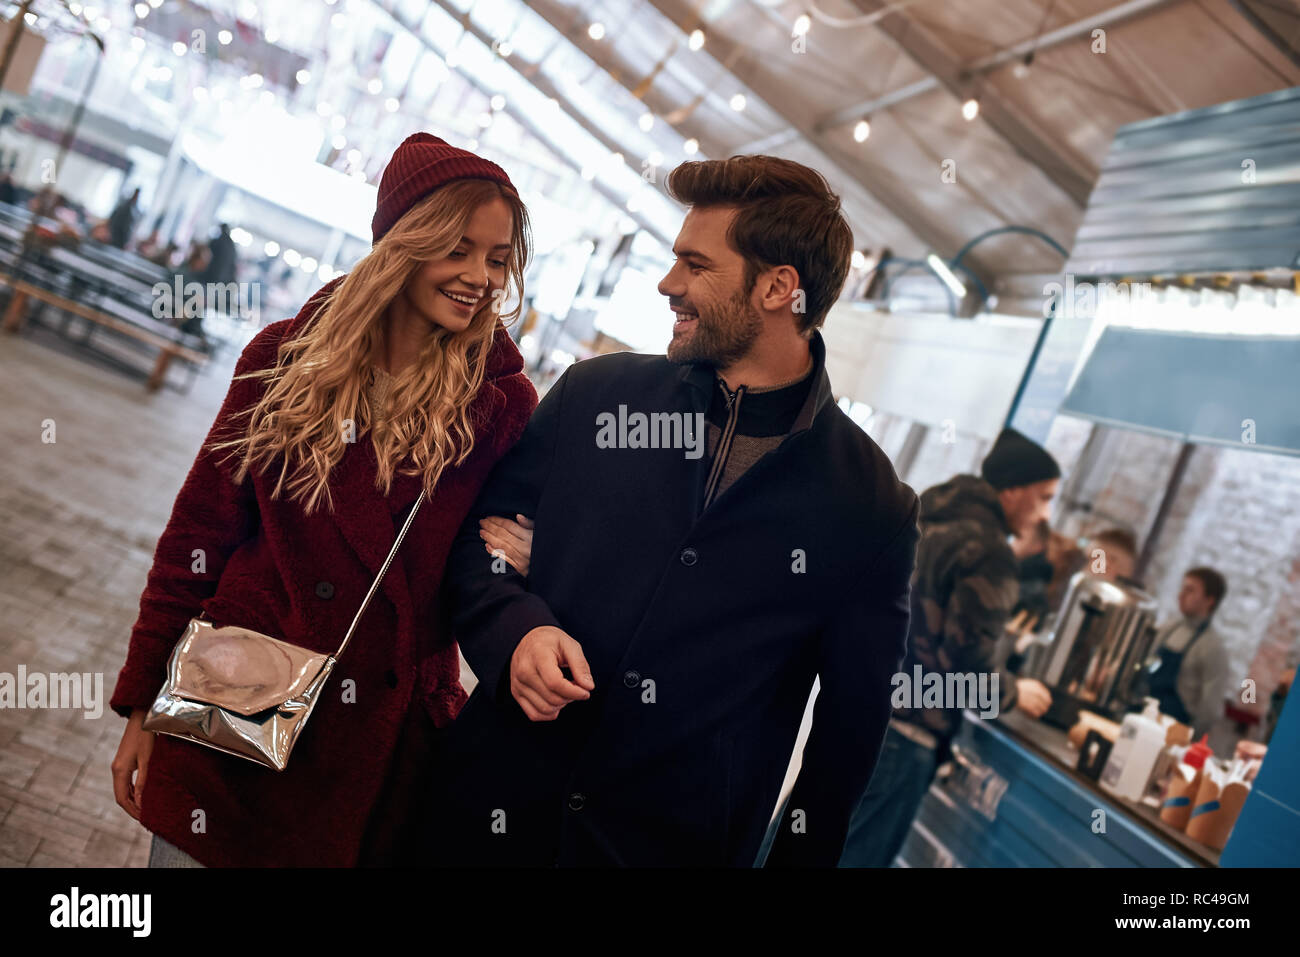 Stroll through the market together. Happy young joyful couple walking around street food market. Autumn season, blond haired woman wearing red cap, he Stock Photo